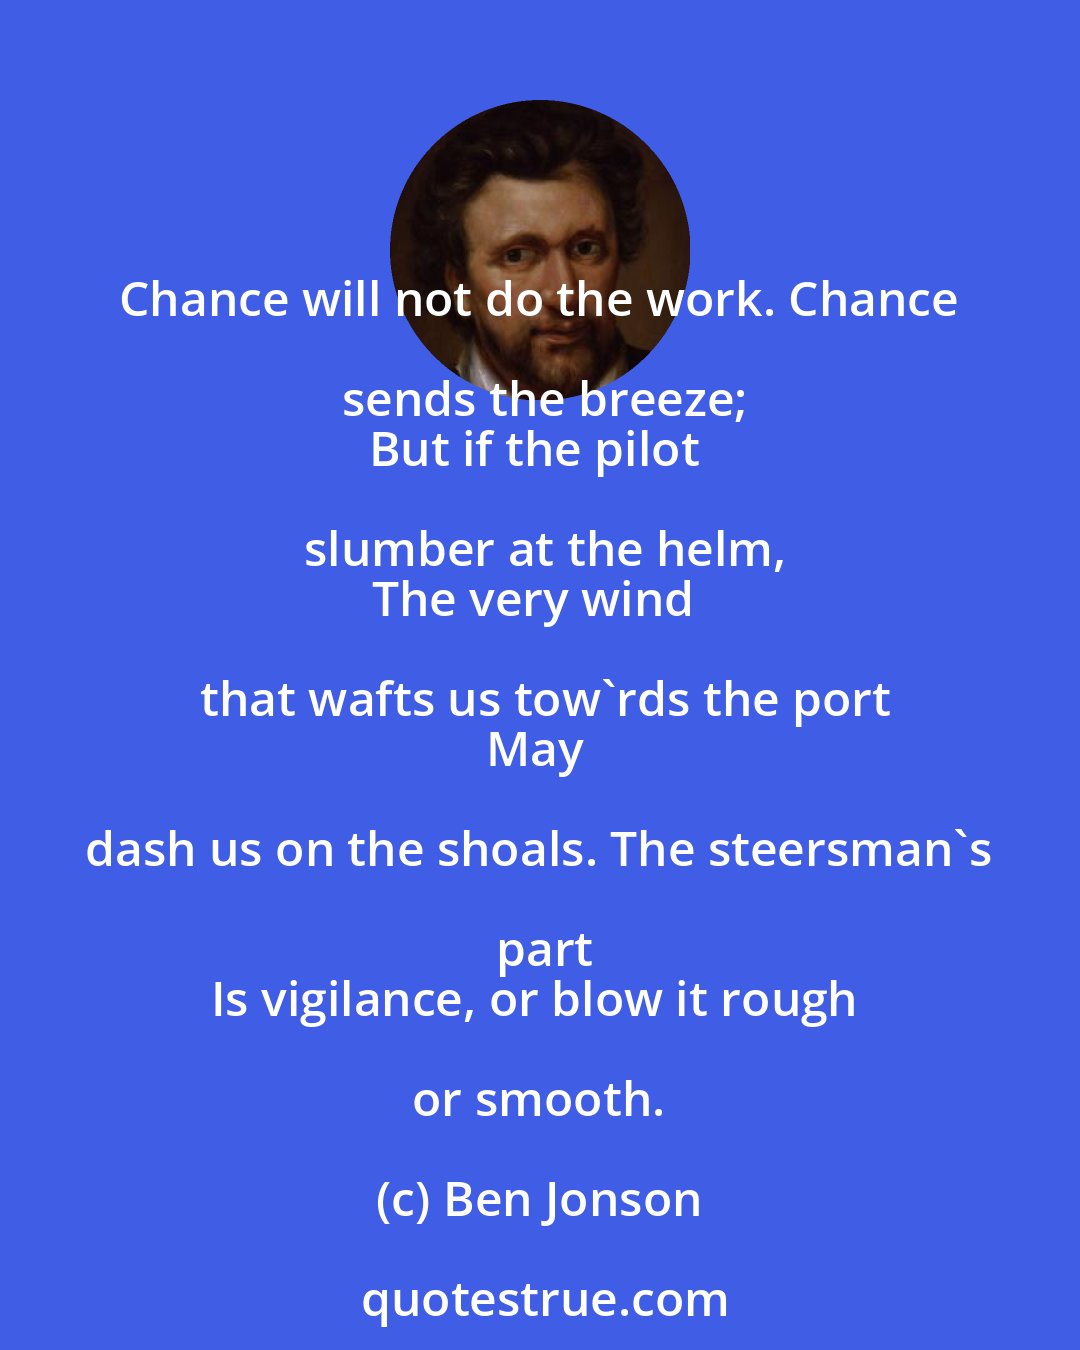 Ben Jonson: Chance will not do the work. Chance sends the breeze;
But if the pilot slumber at the helm,
The very wind that wafts us tow'rds the port
May dash us on the shoals. The steersman's part
Is vigilance, or blow it rough or smooth.